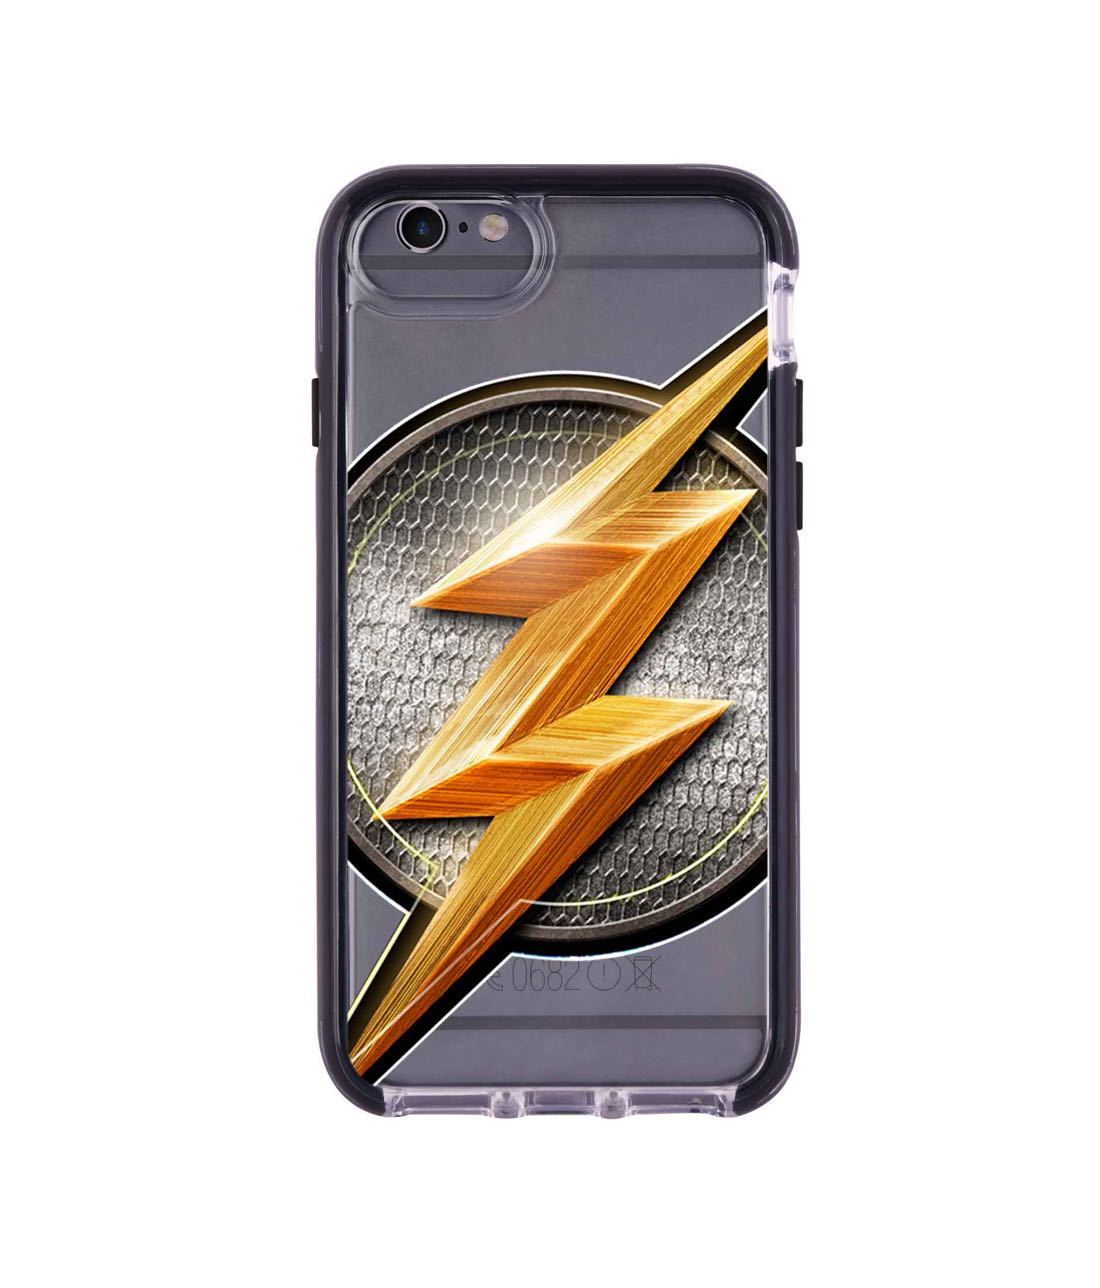 Flash Storm - Extreme Phone Case for iPhone 6S Plus